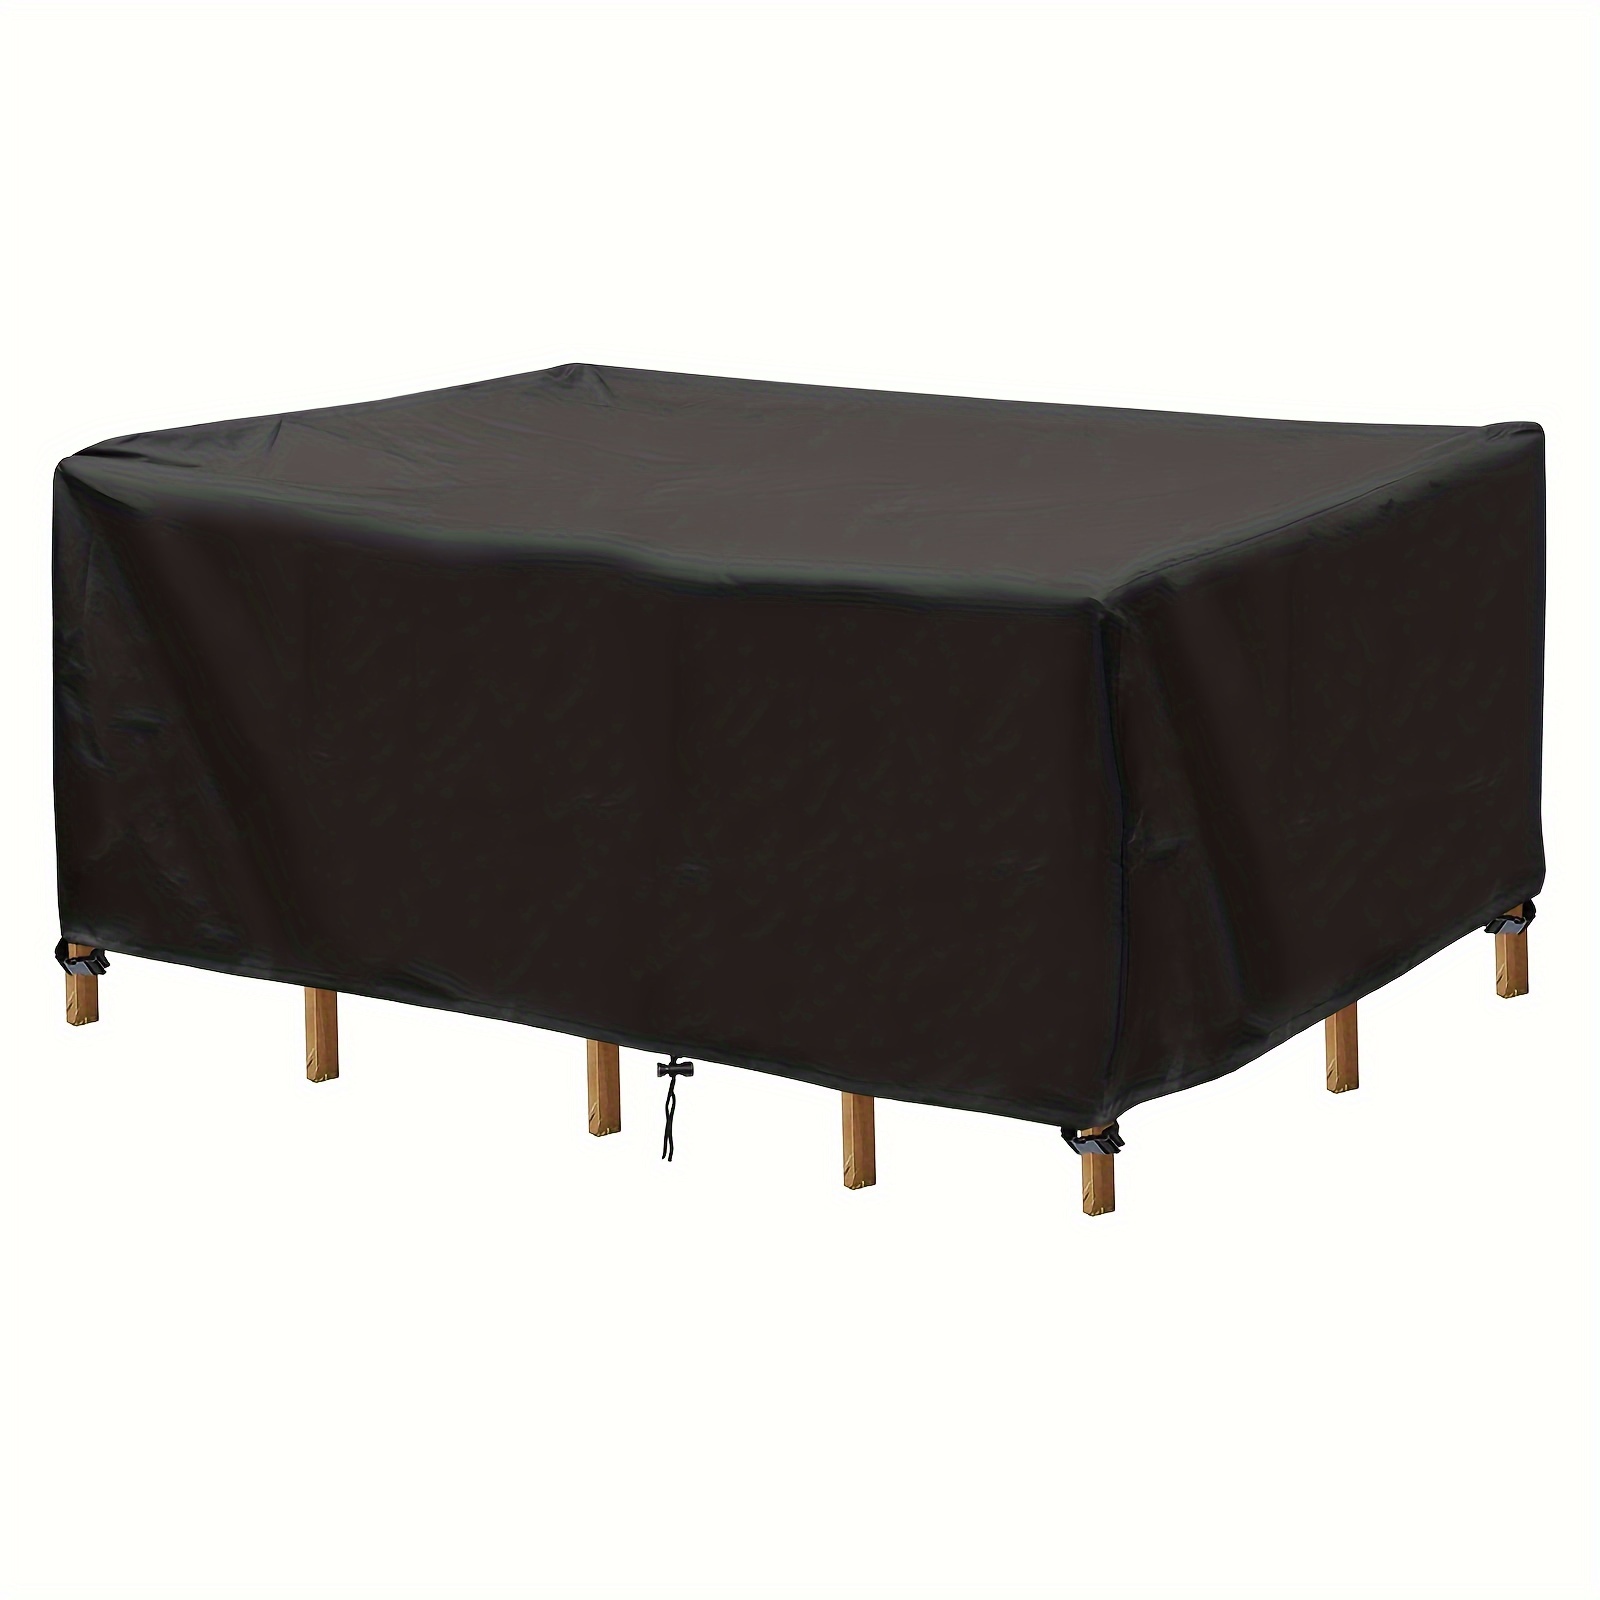 

Waterproof Patio Furniture Cover - Durable Polyester, Tie-down Design For Sectional Sofa & Couch Set, Outdoor Table And Chairs Protection, Rectangle 59"x35"x29.5", Black